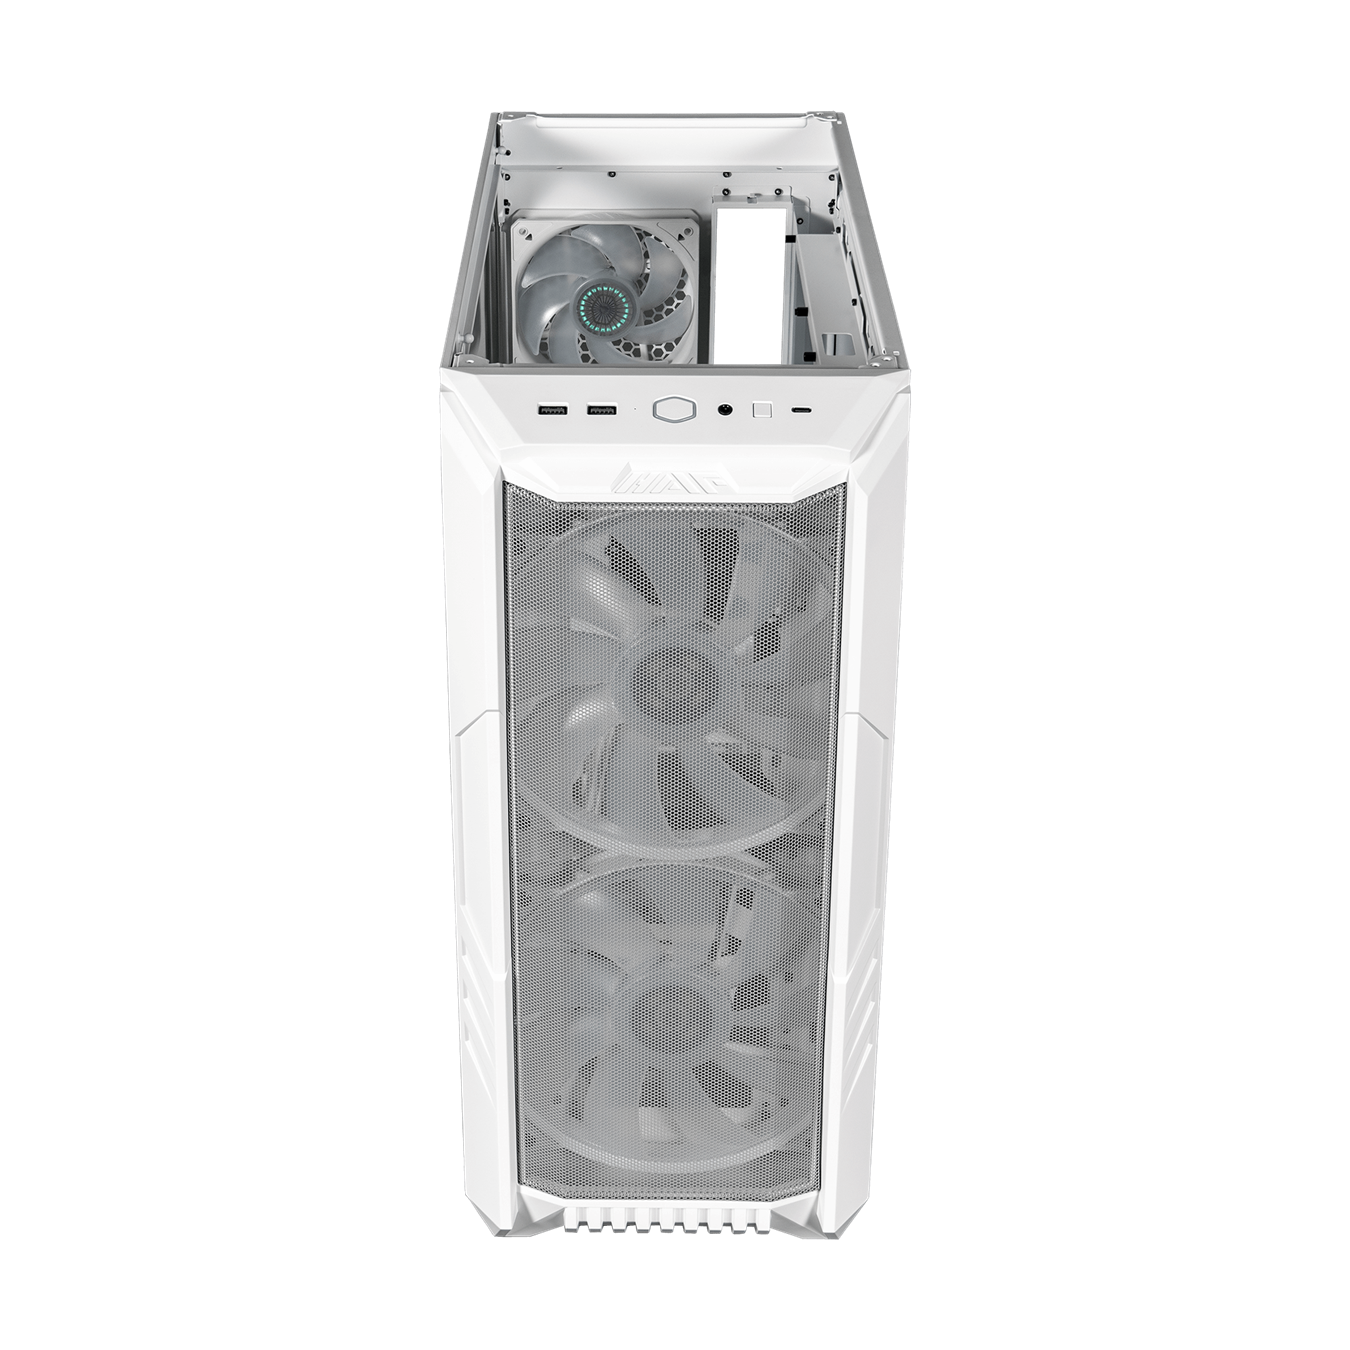 45 degree front view of the white HAF 500 with top panel removed.